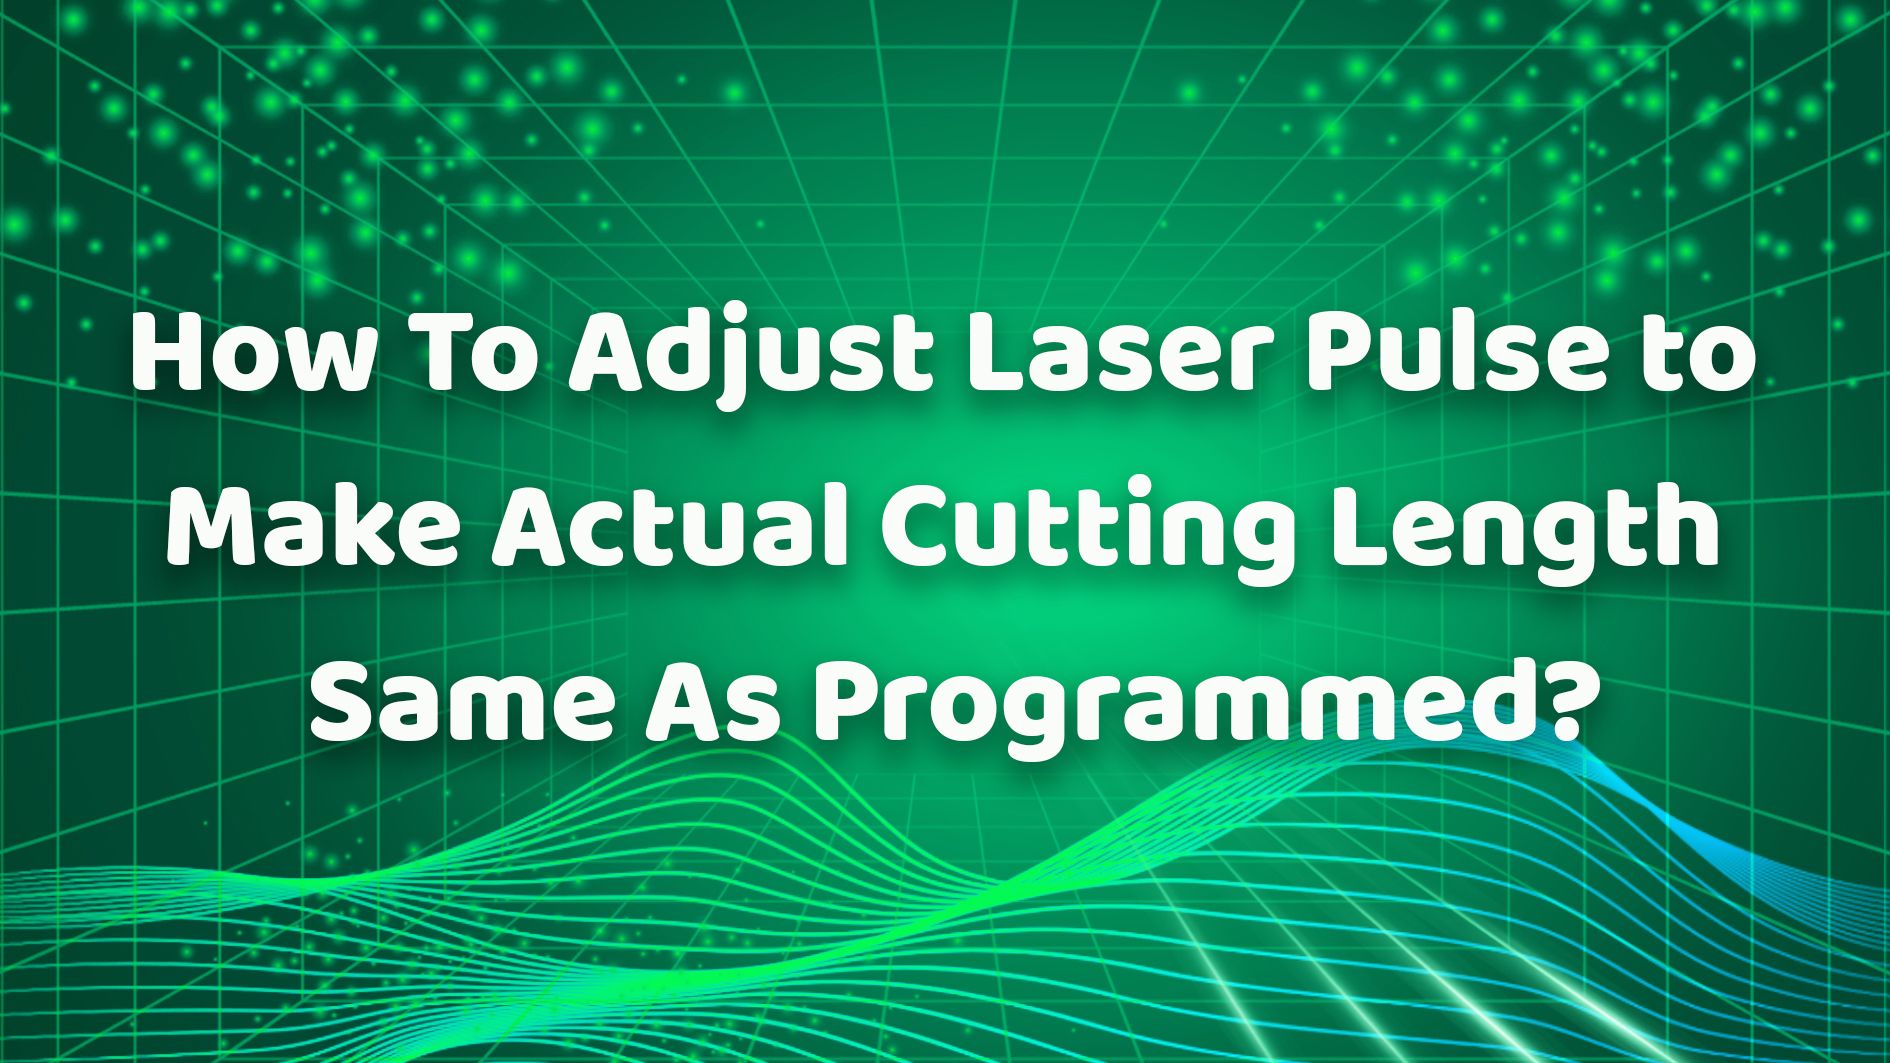 How To Adjust Laser Pulse to Make Actual Cutting Length Same As Programmed